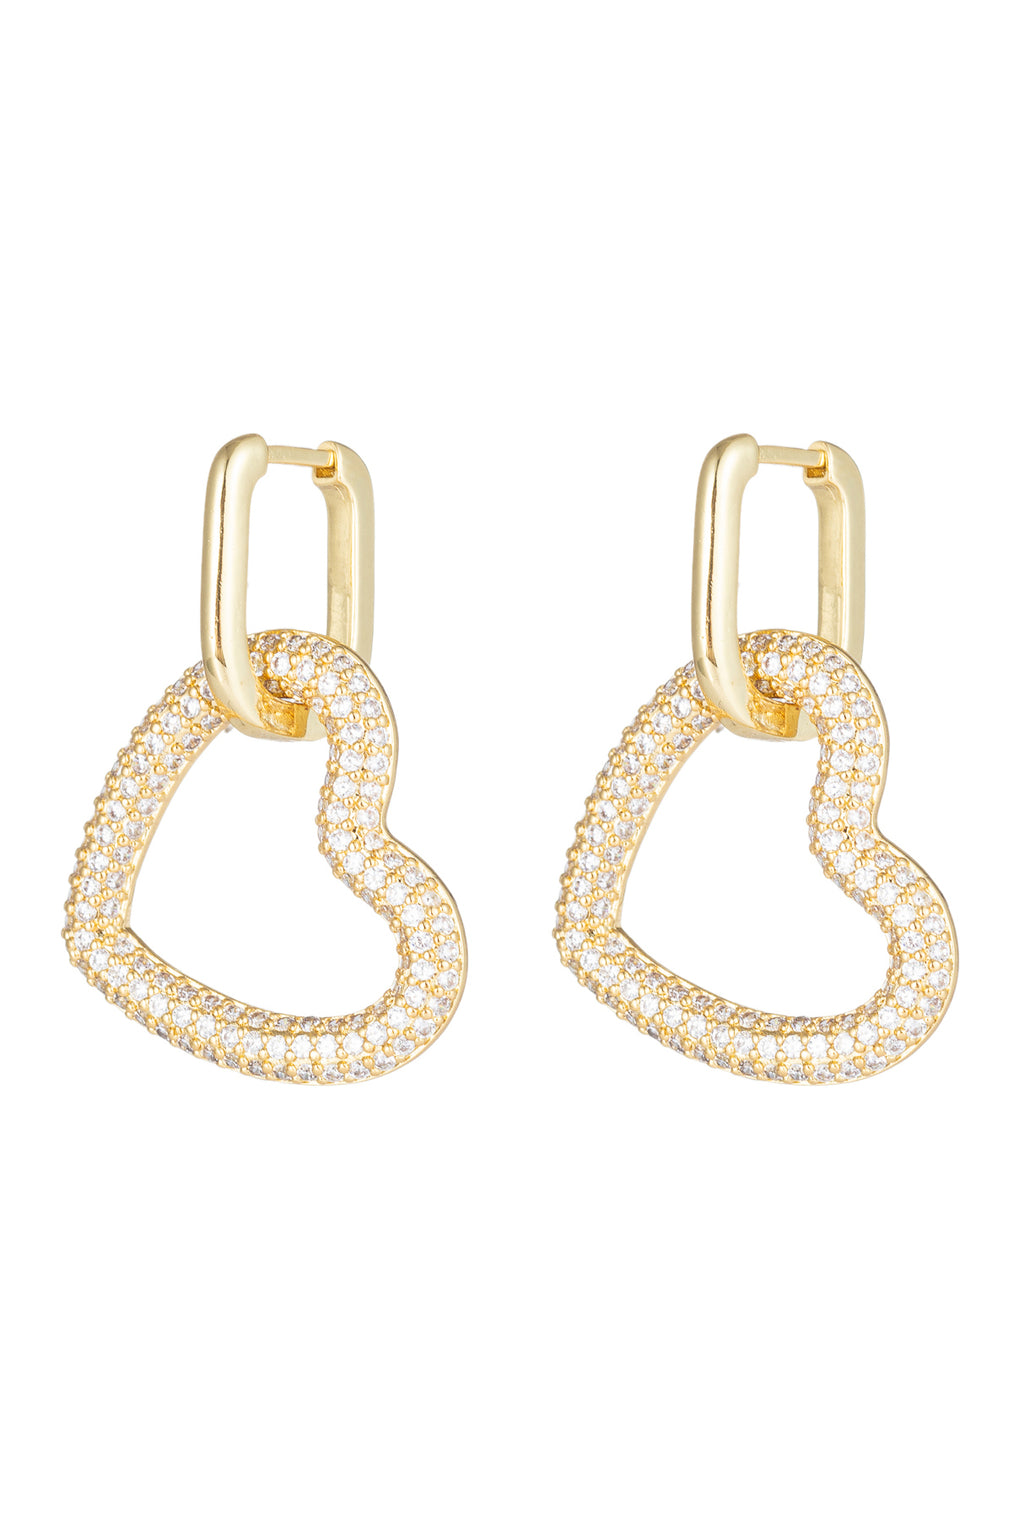 Double heart 18k gold plated earrings studded with CZ crystals.